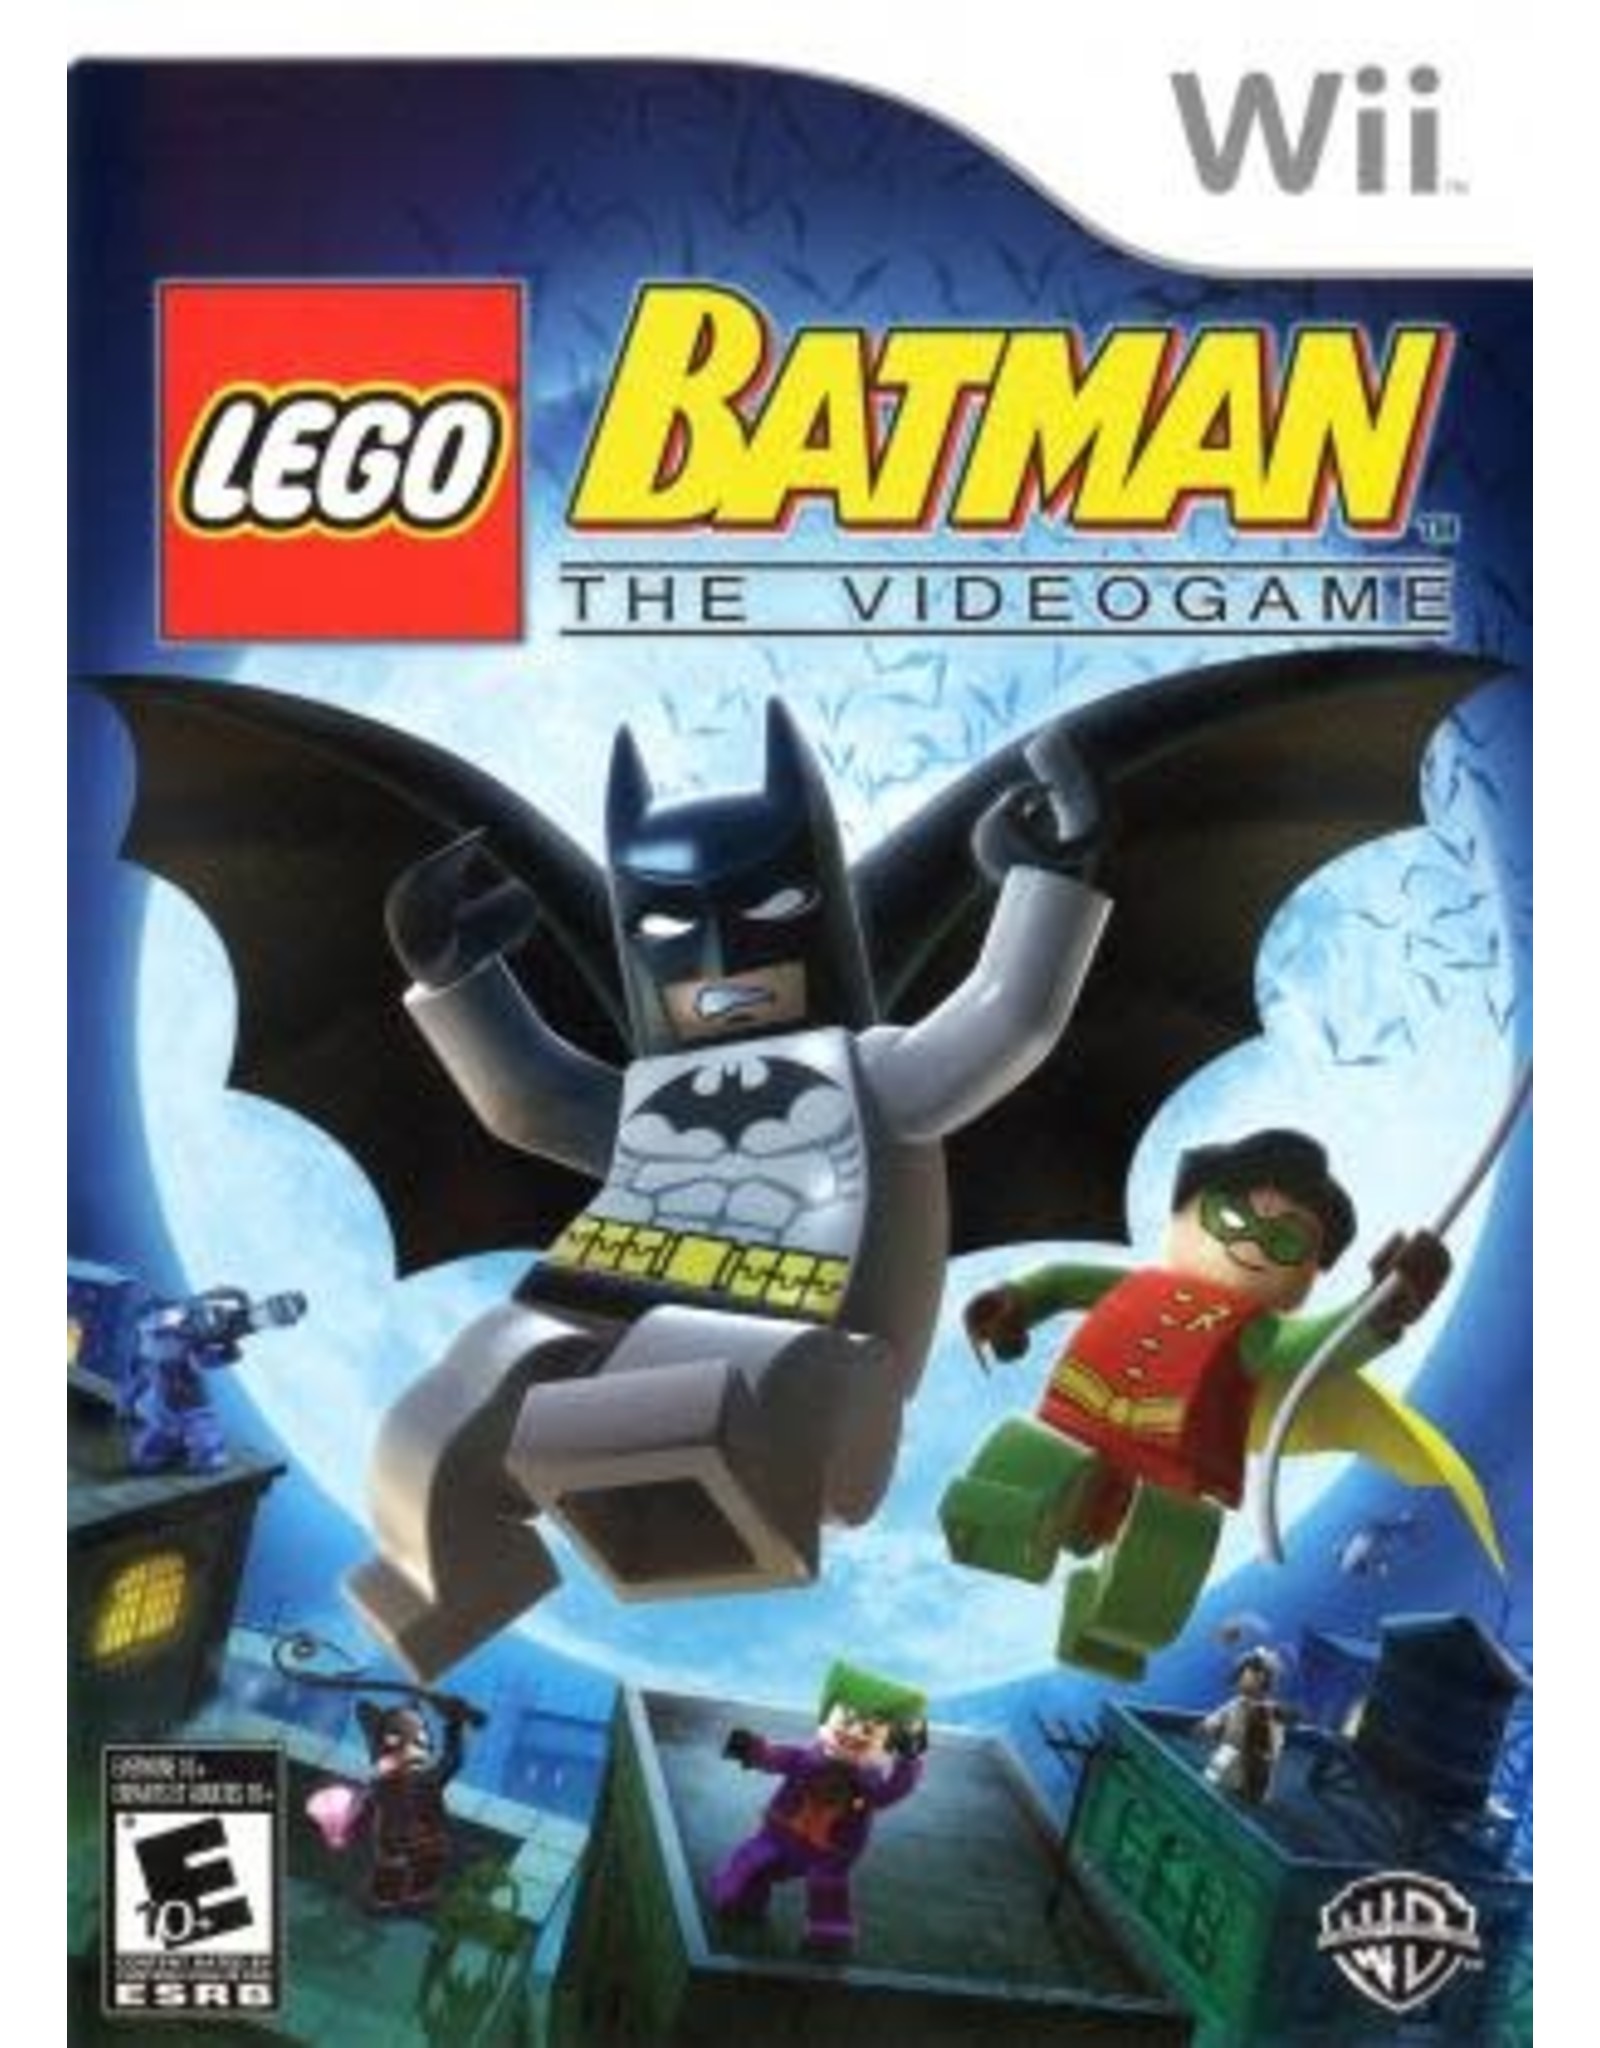 Wii LEGO Batman The Videogame (Used)